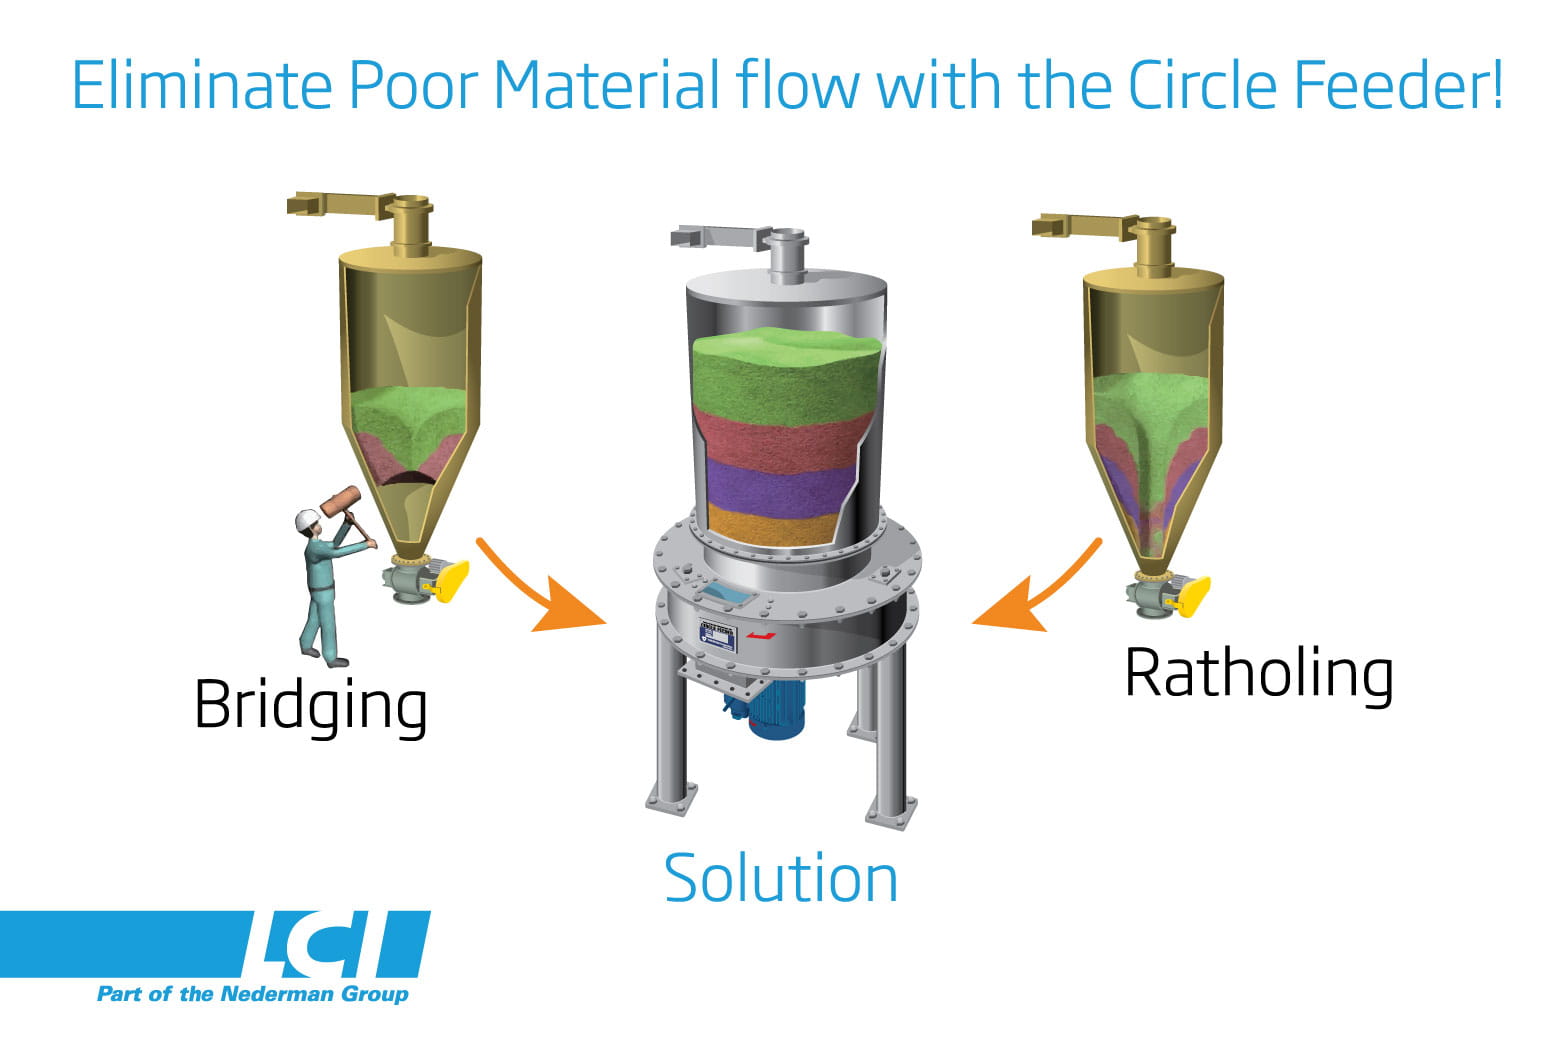 Circle Feeder prevents ratholing and bridging of materials